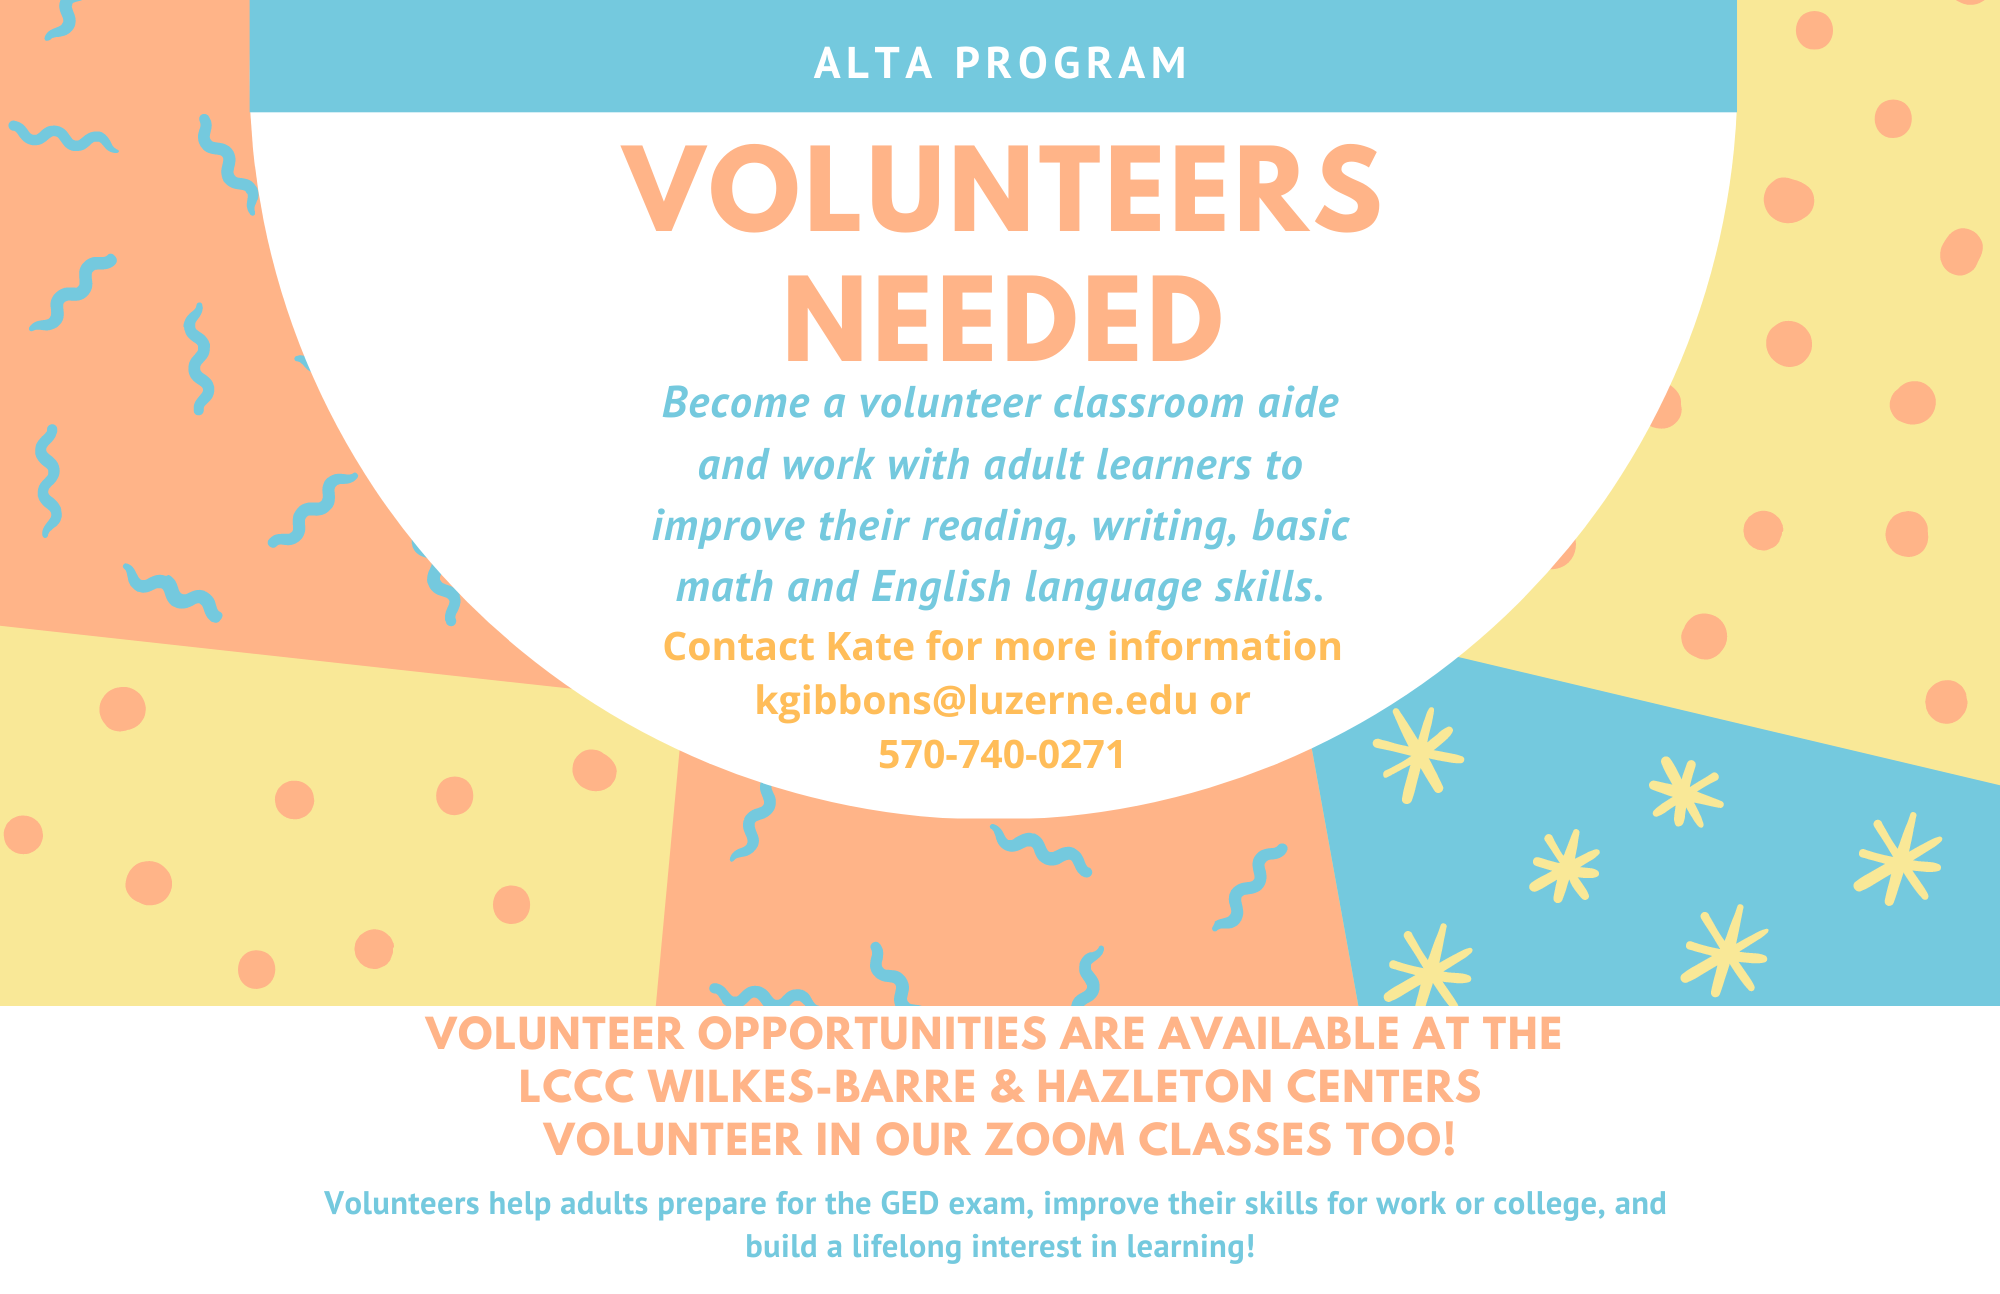 Become a Volunteer Classroom Aide